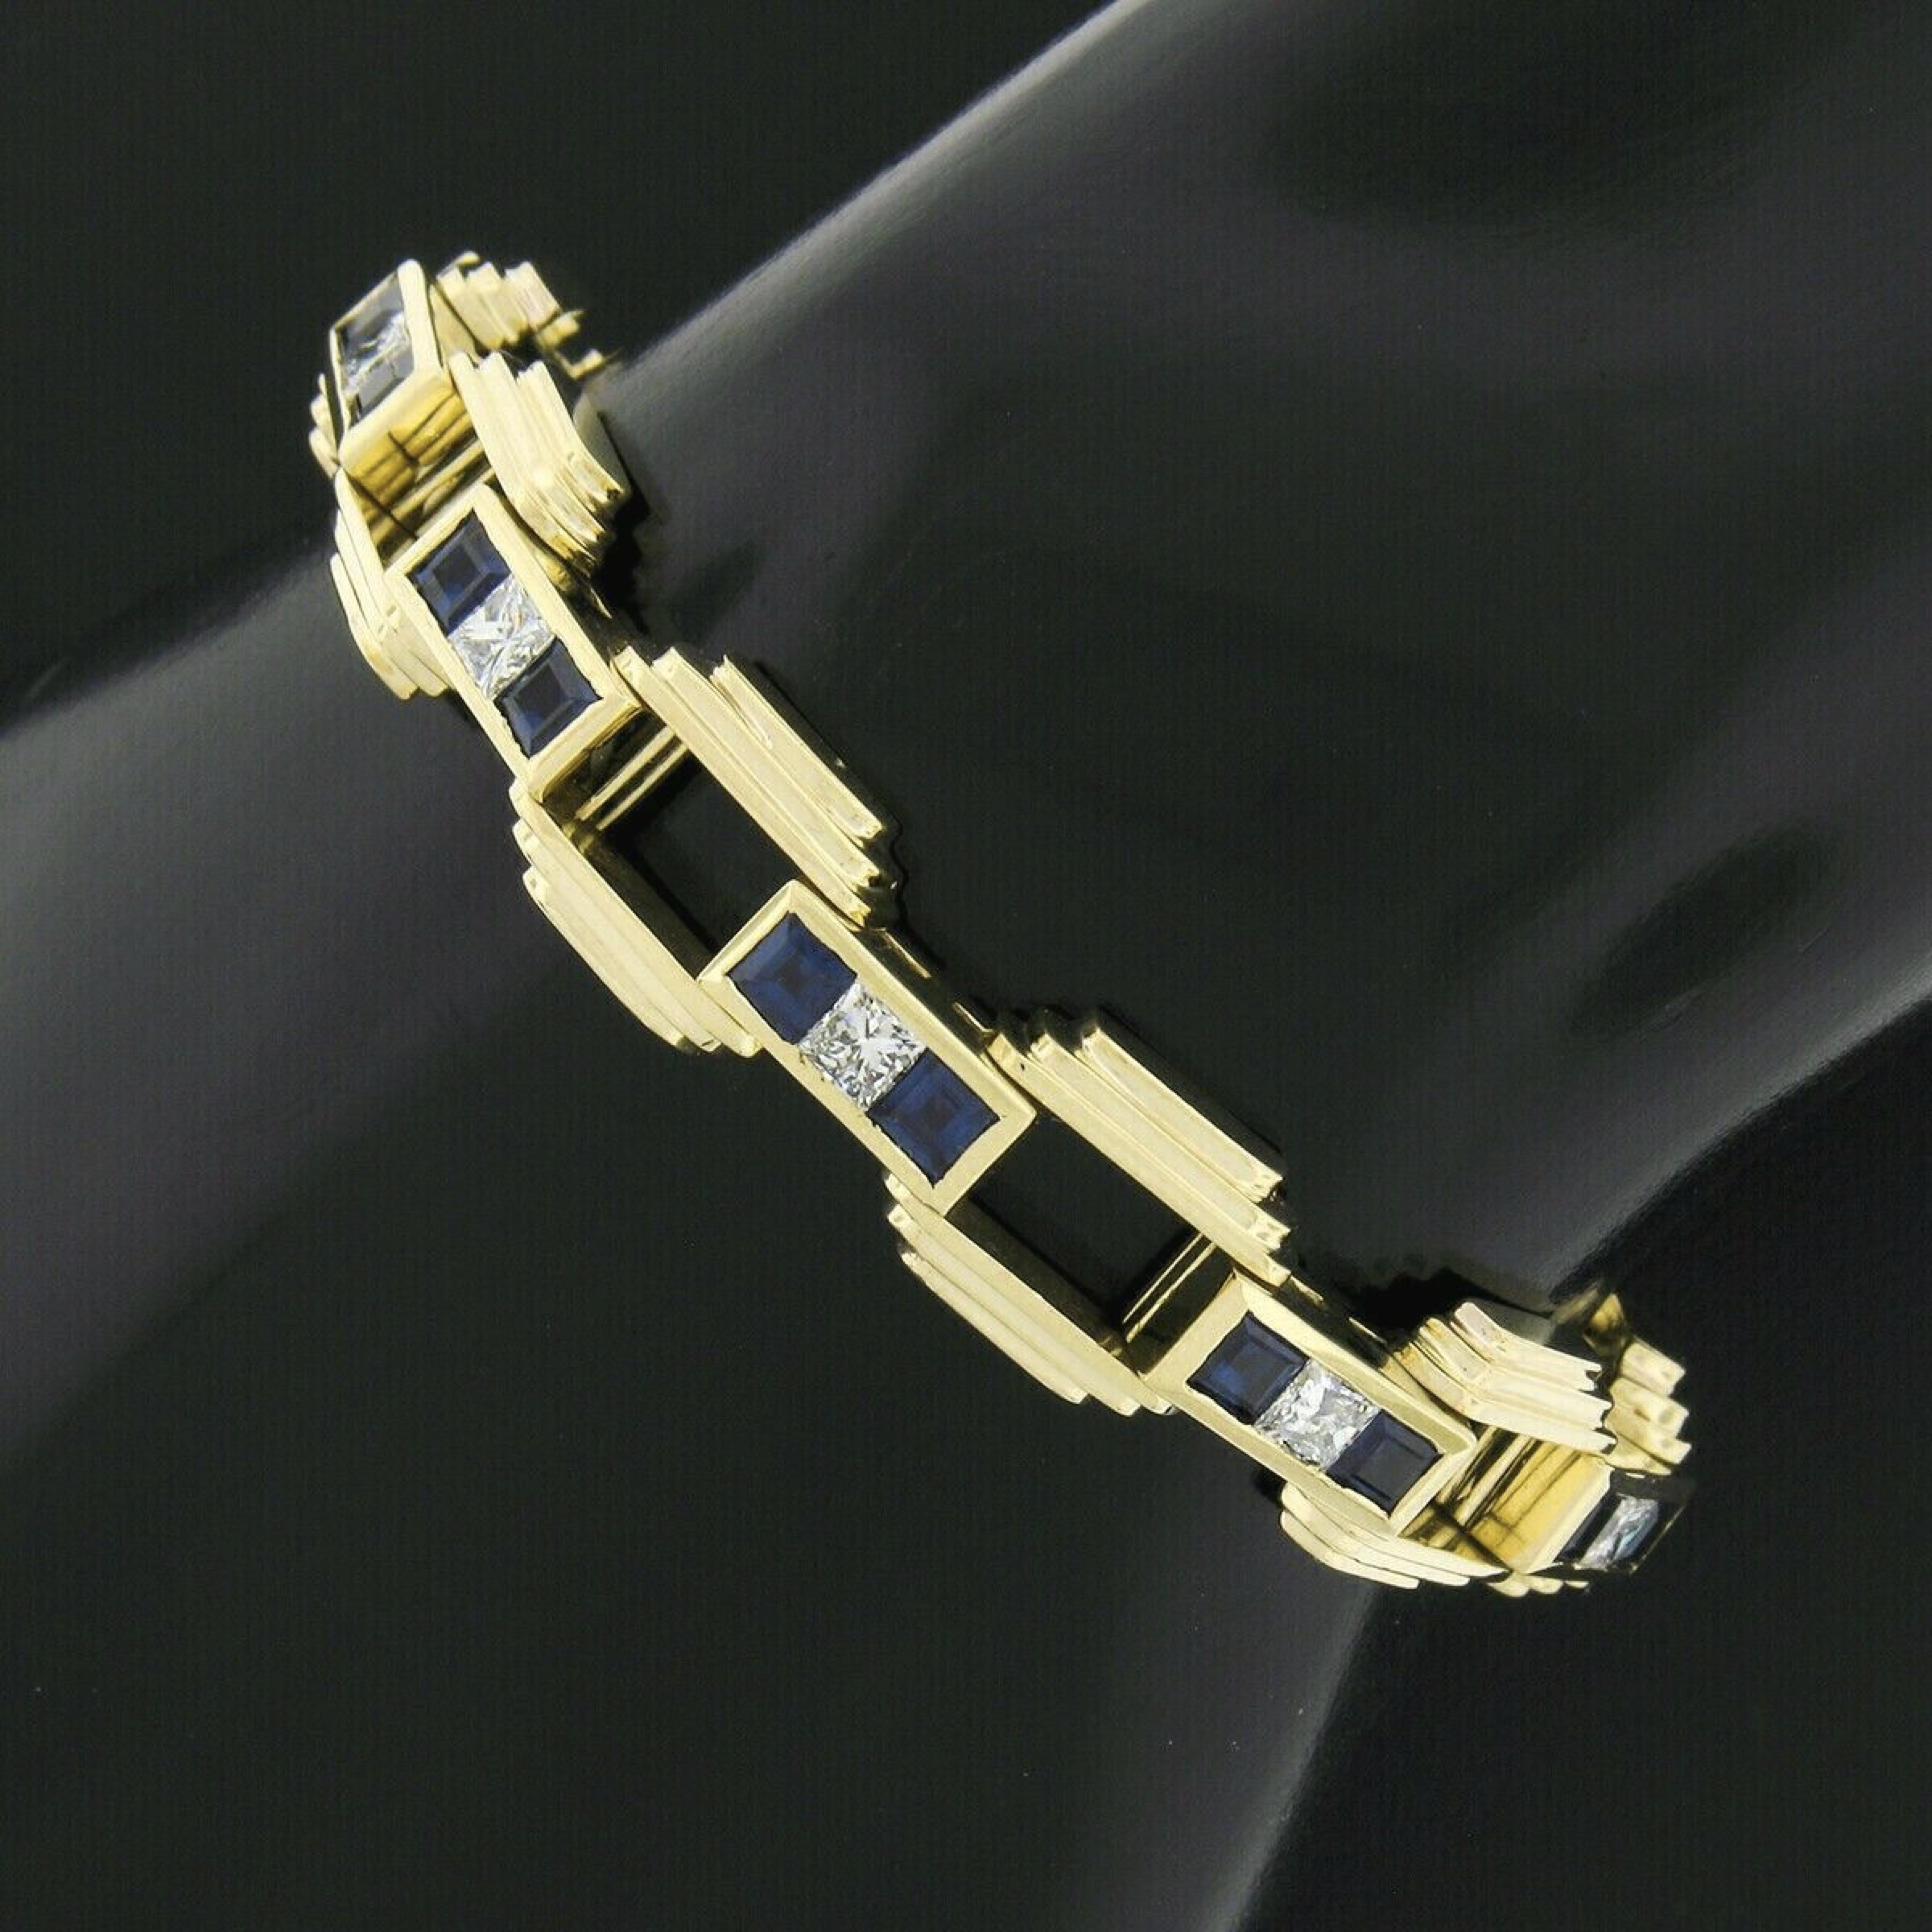 You are looking at an absolutely magnificent vintage bracelet that was crafted from solid 18k yellow gold featuring elegant pyramid open links that are channel set with very fine quality sapphires and diamonds throughout. The square step cut